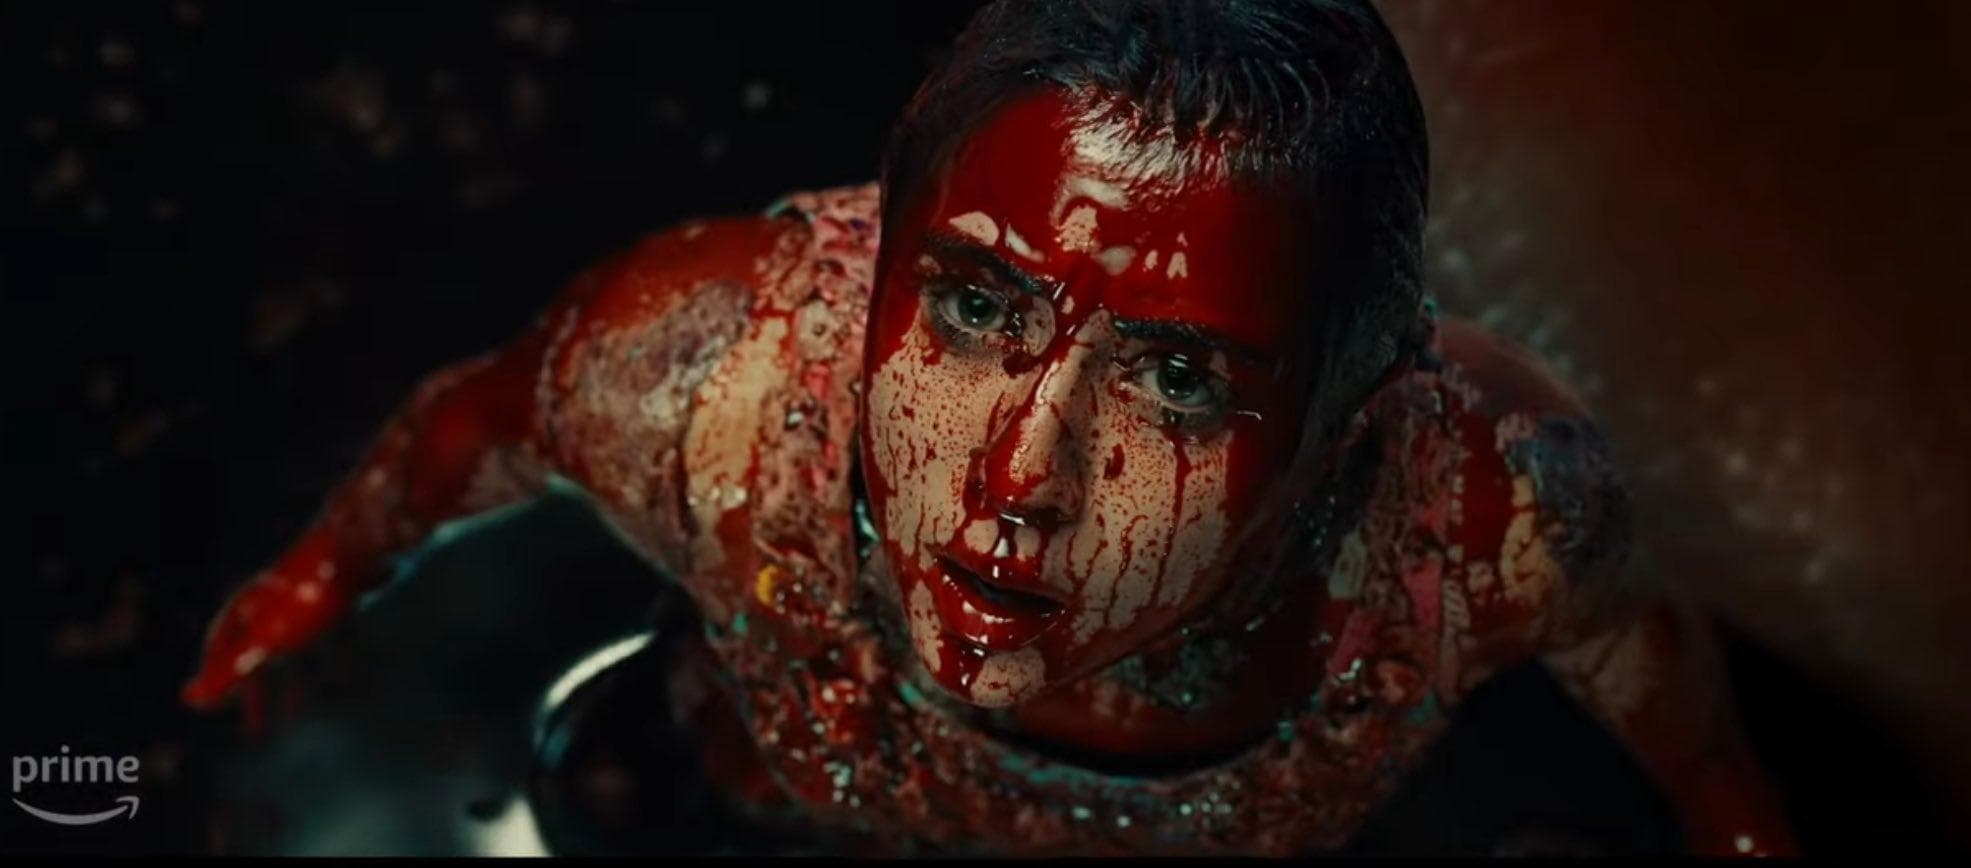 A woman is covered in blood in this image from Amazon Studios.